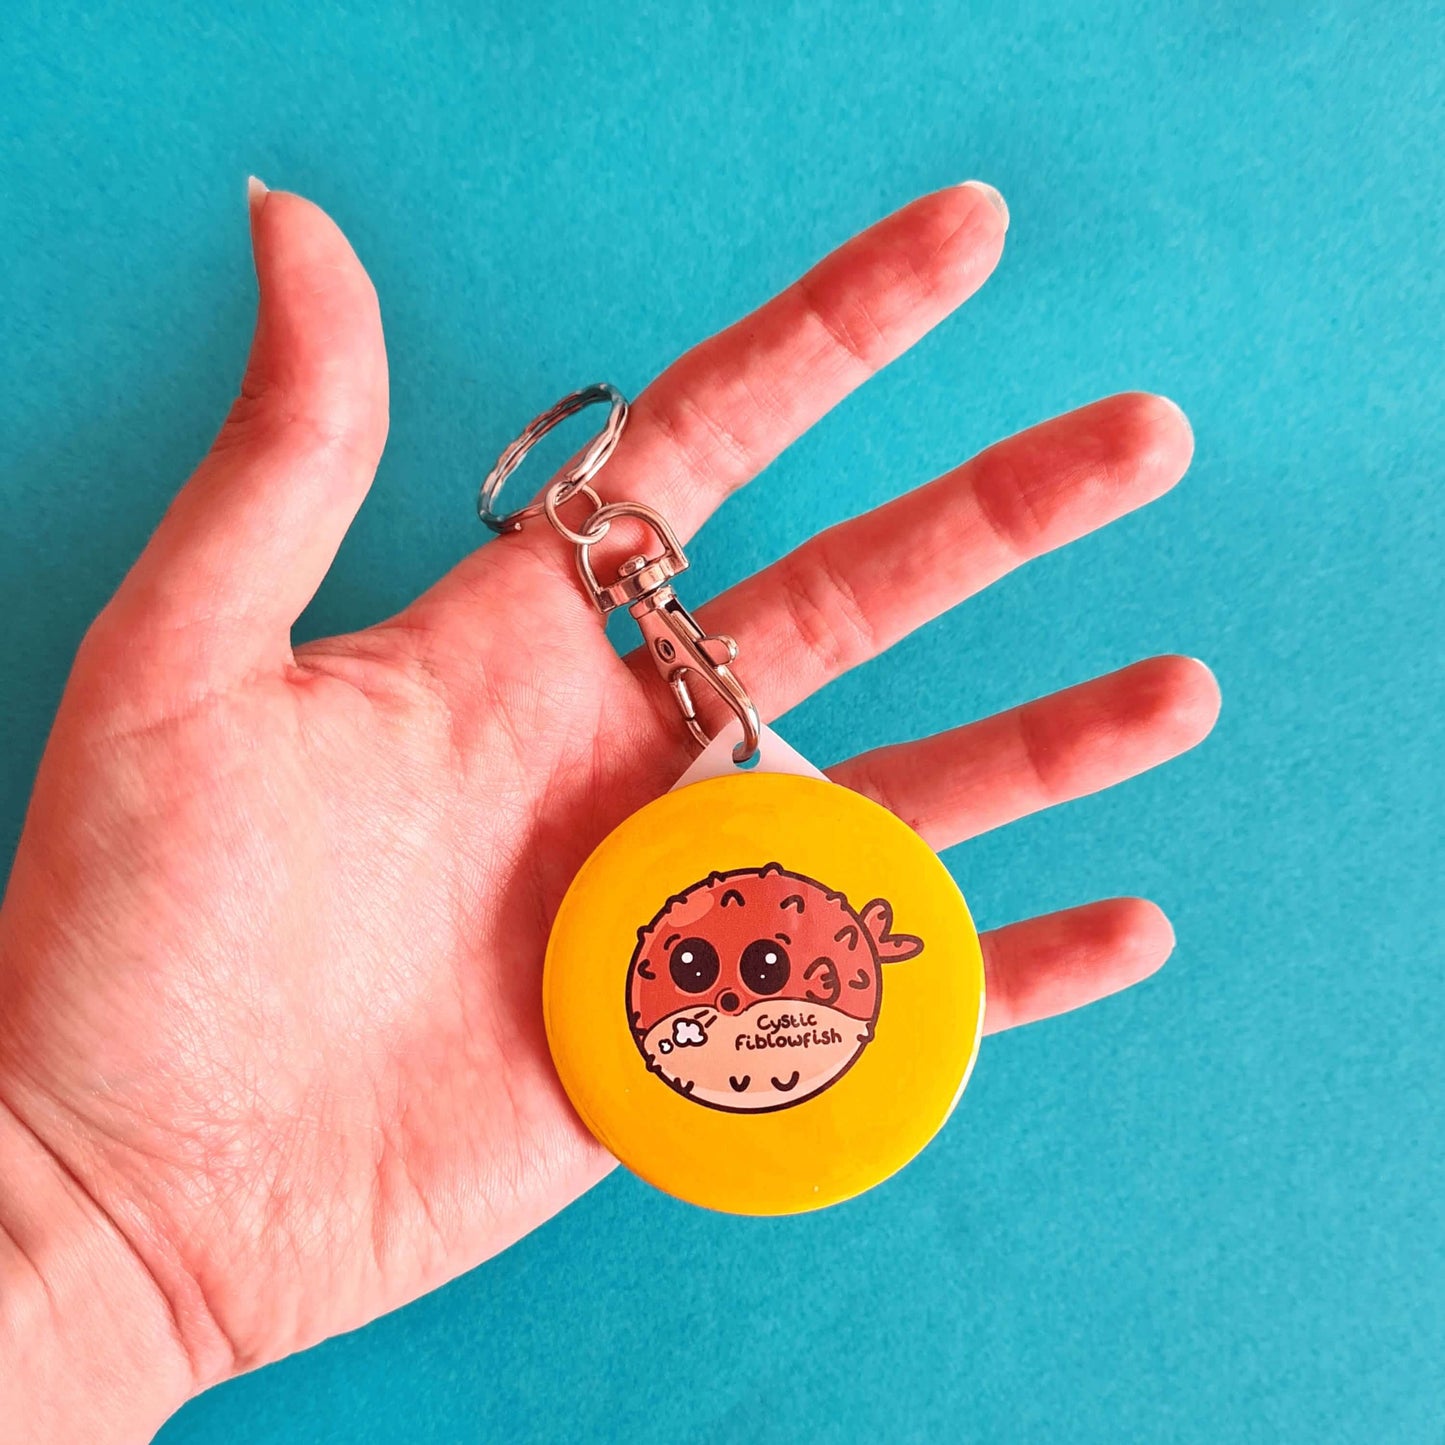 The Cystic Fiblowfish Keyring - Cystic Fibrosis being held on a blue background. The silver clip plastic yellow circle keychain with a puffer fish blowfish wheezing with 'cystic fiblowfish' written in black on its belly. The design is raising awareness for cystic fibrosis.